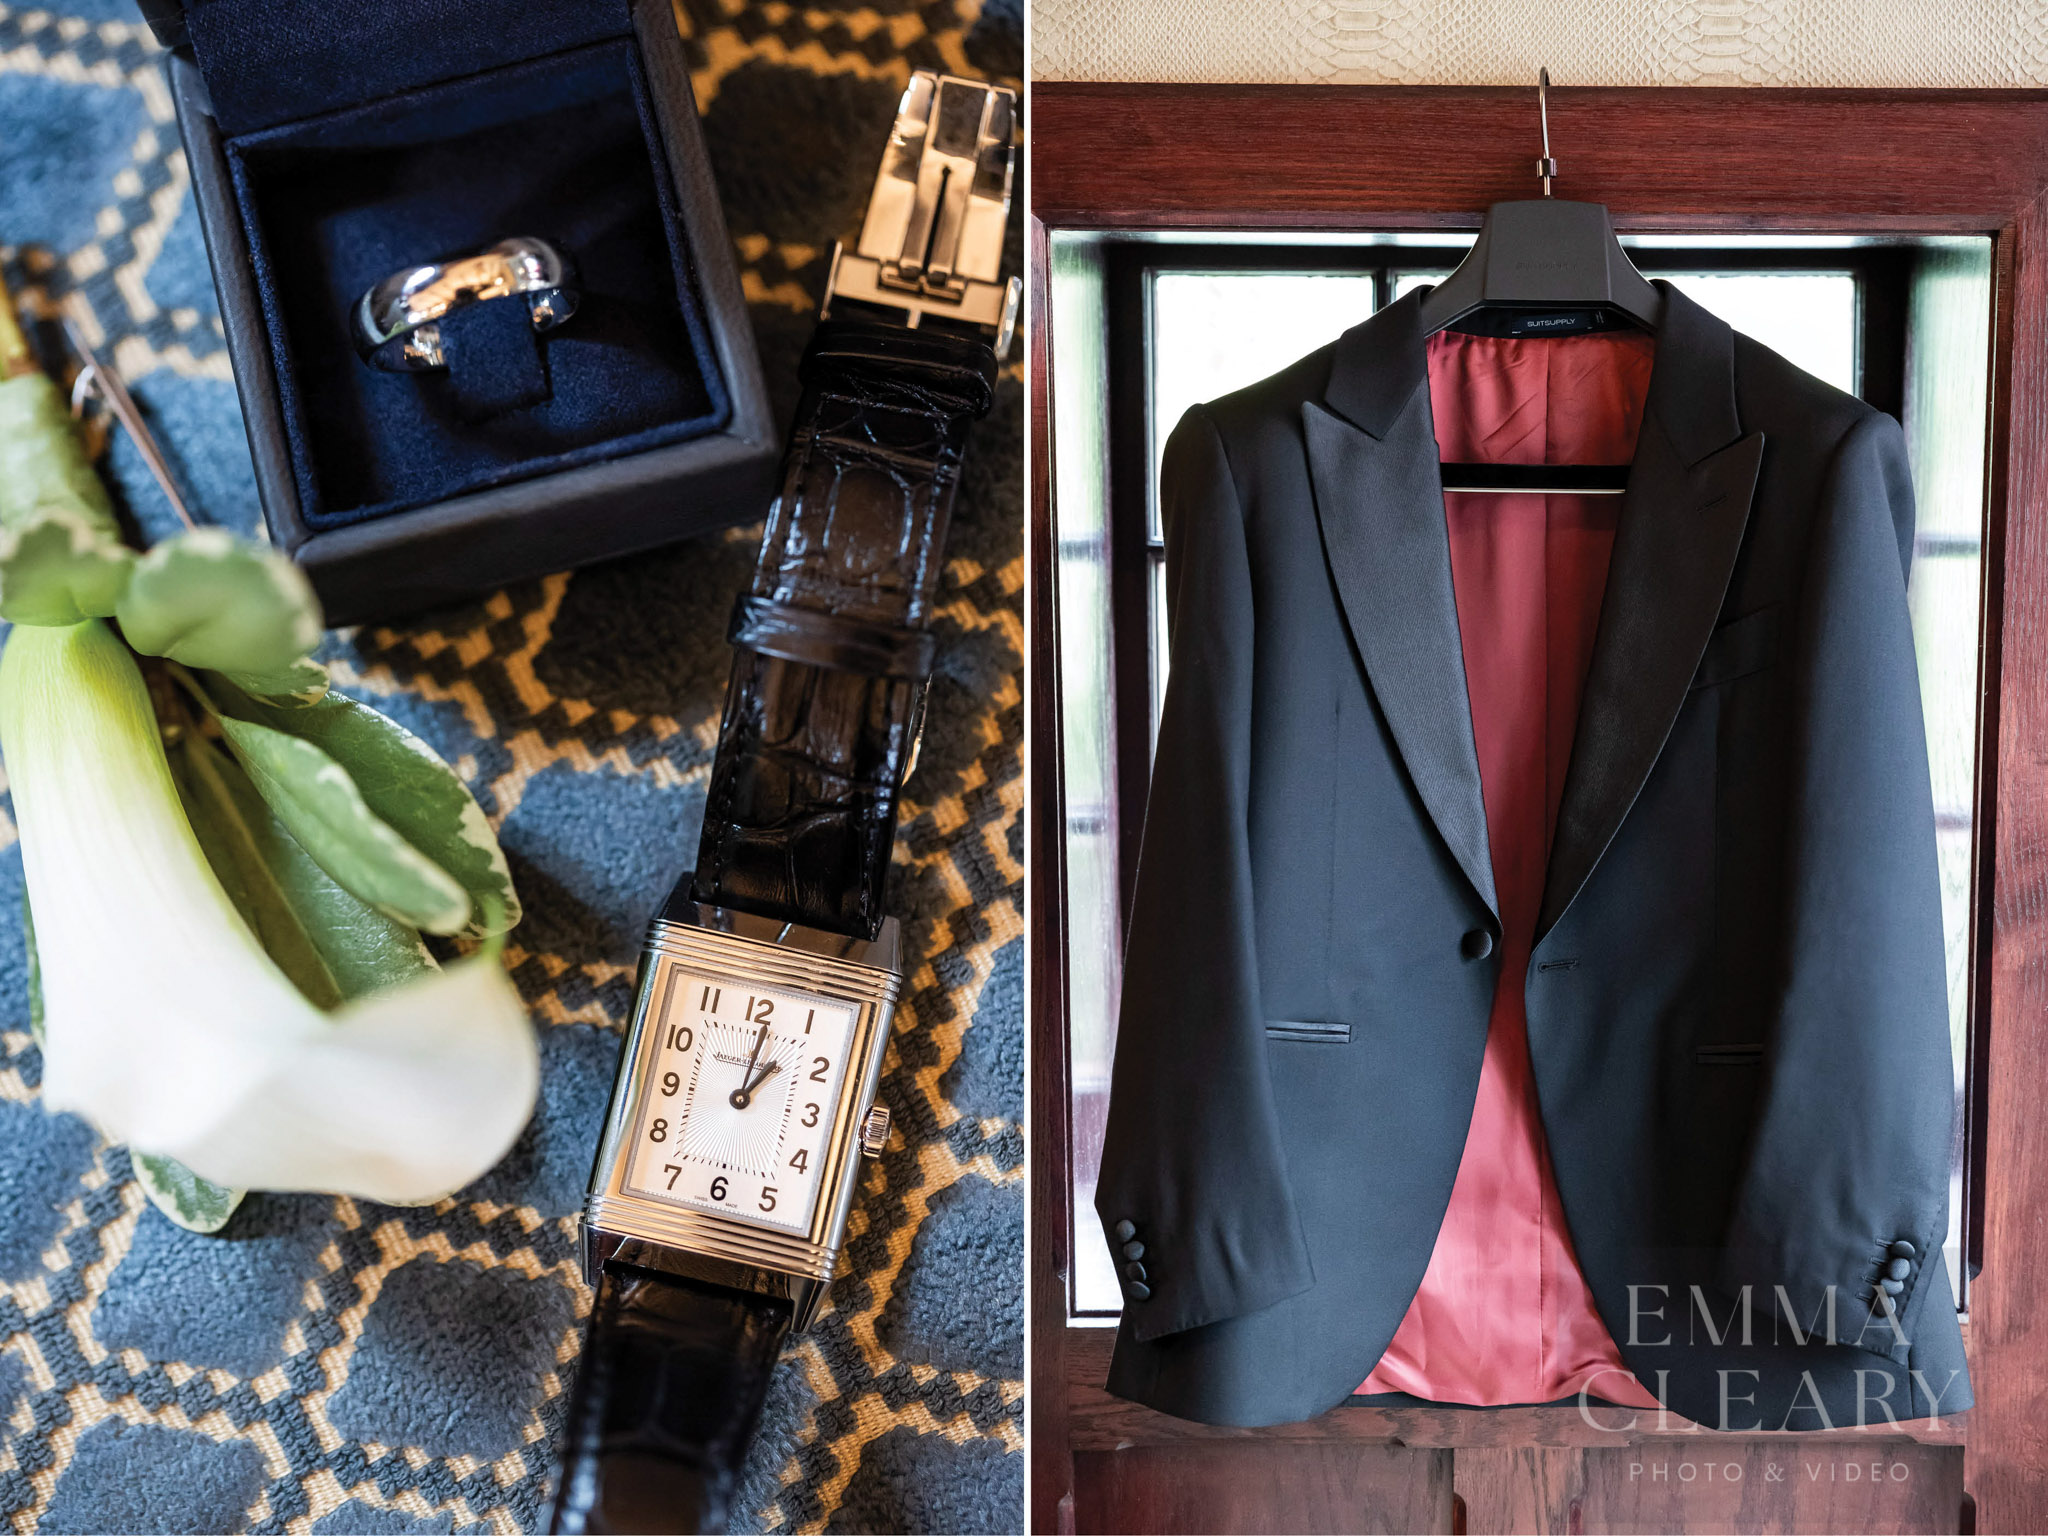 The groom's suit and watch